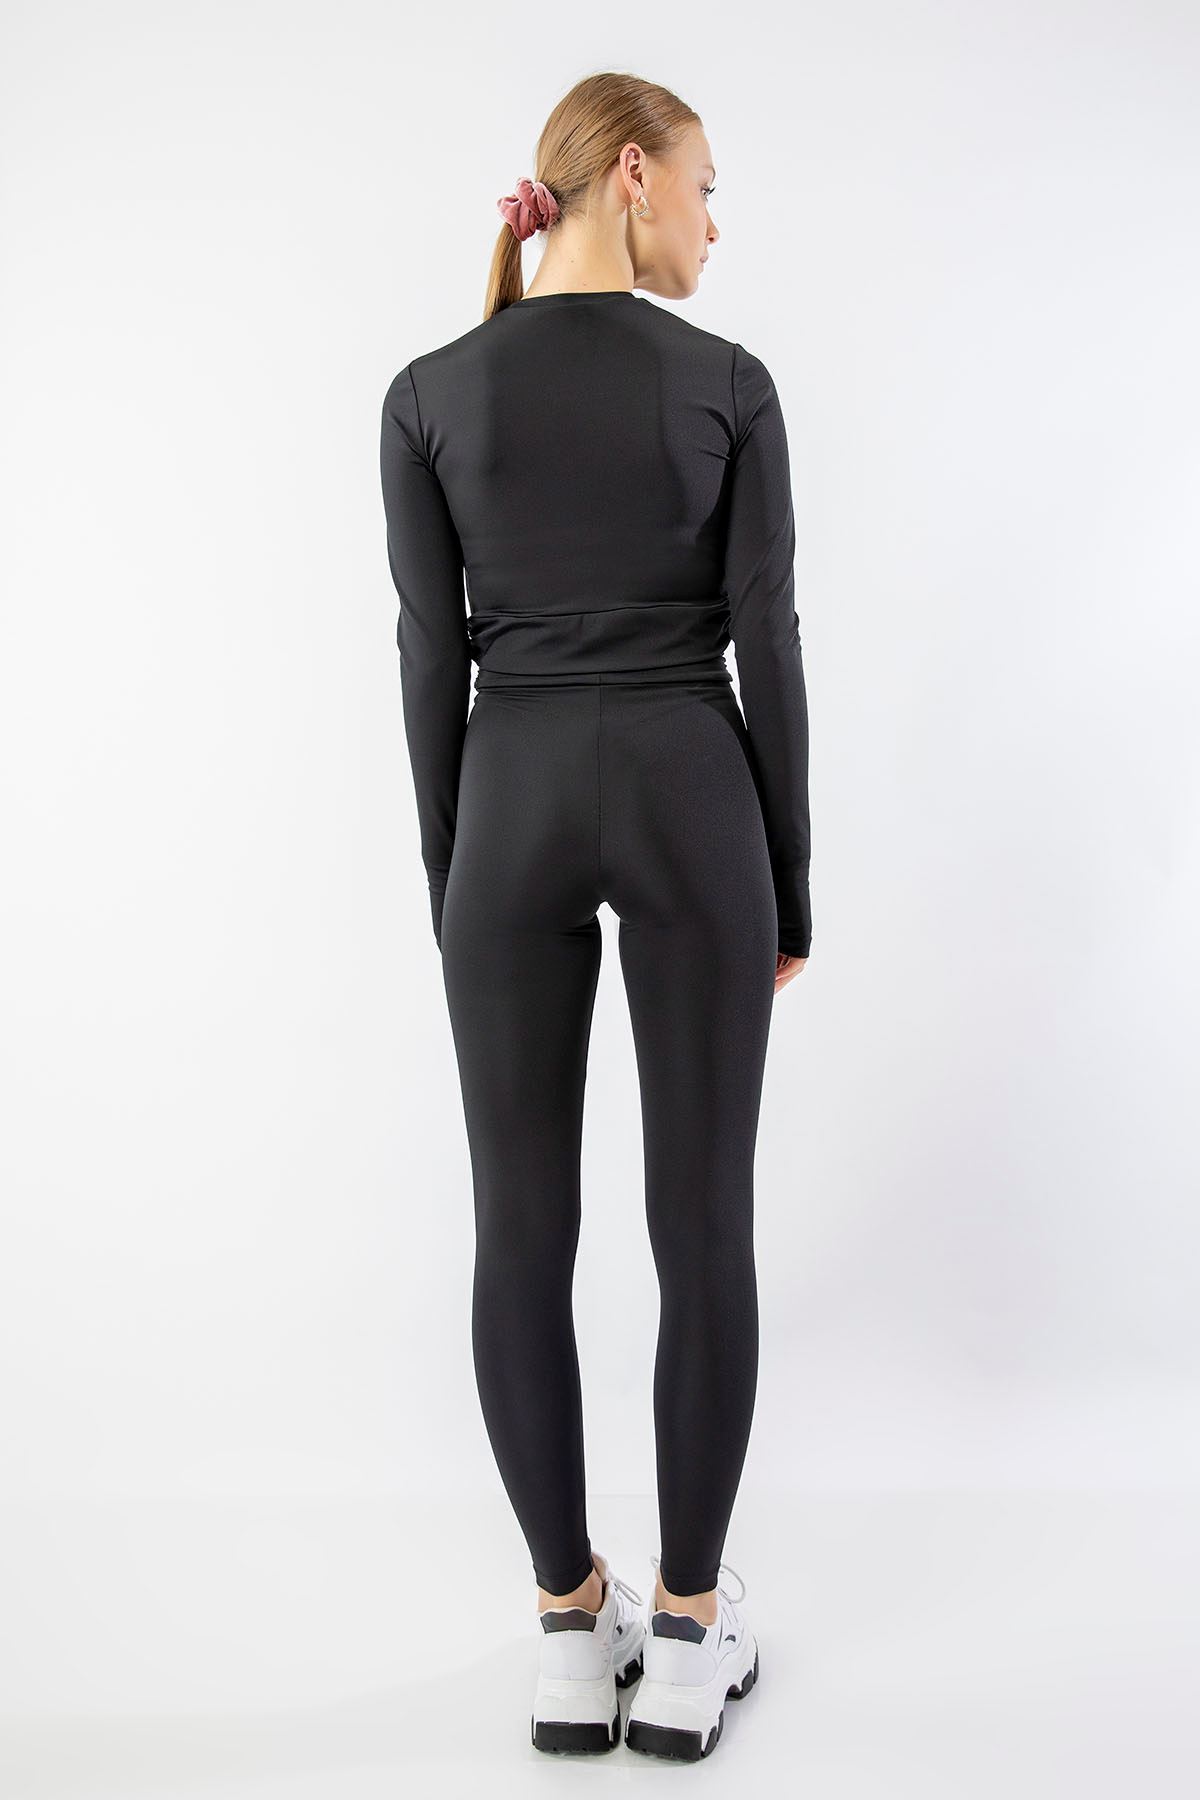 Scuba Fabric Long Shirred Women Tights Collection - Black